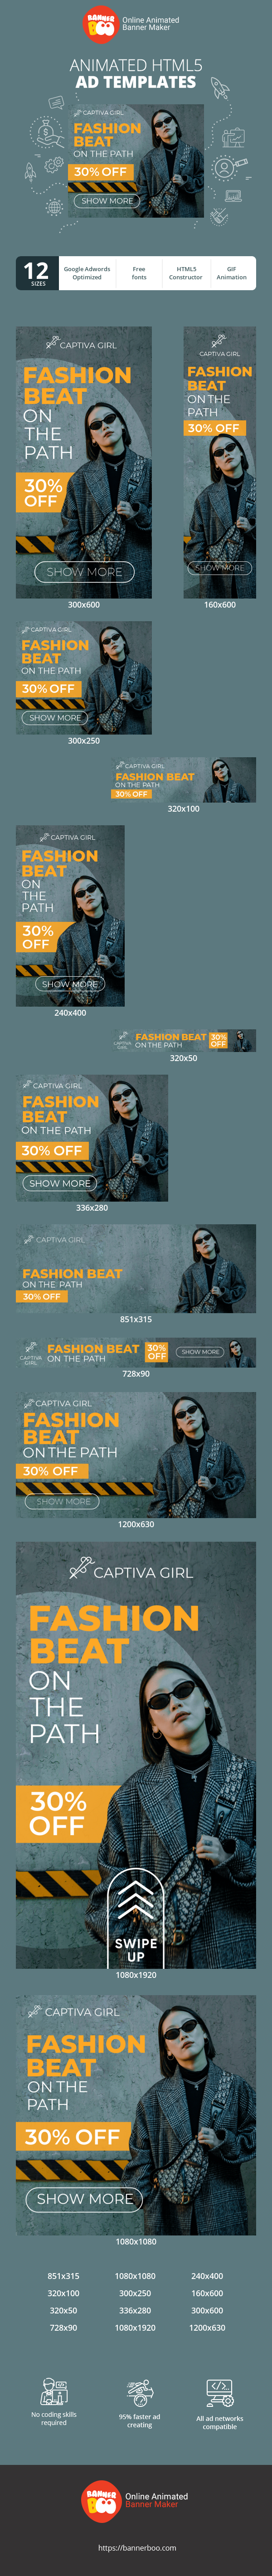 Banner ad template — Fashion Beat On The Path — 30% Off